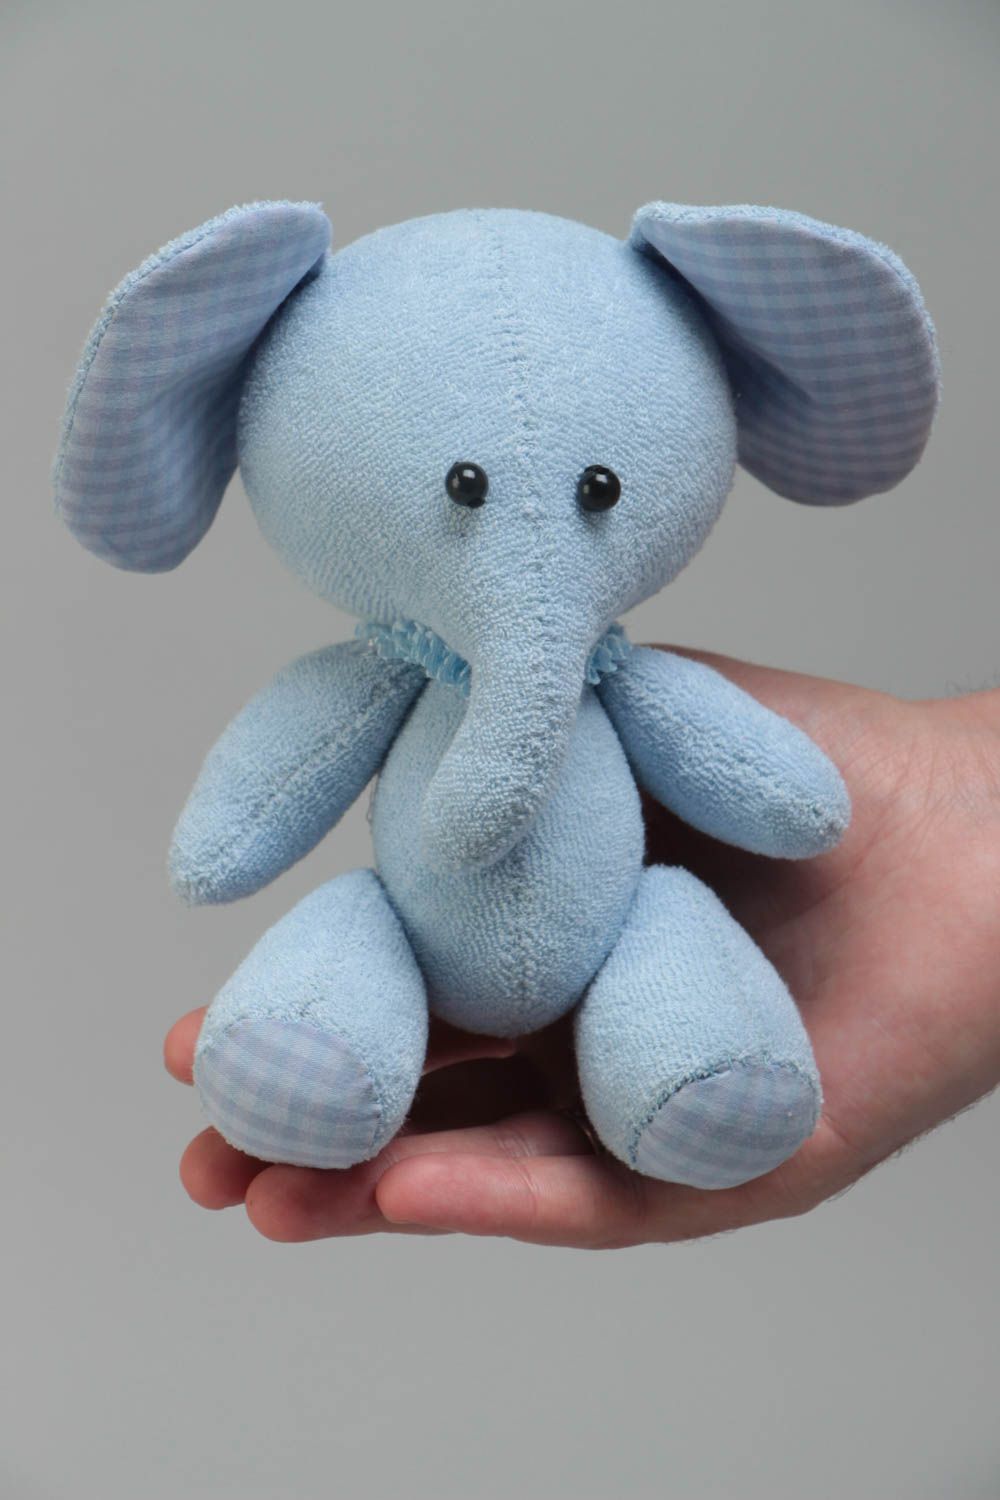 Handmade soft toy sewn of jersey and mohair fabric small blue elephant for kids photo 5